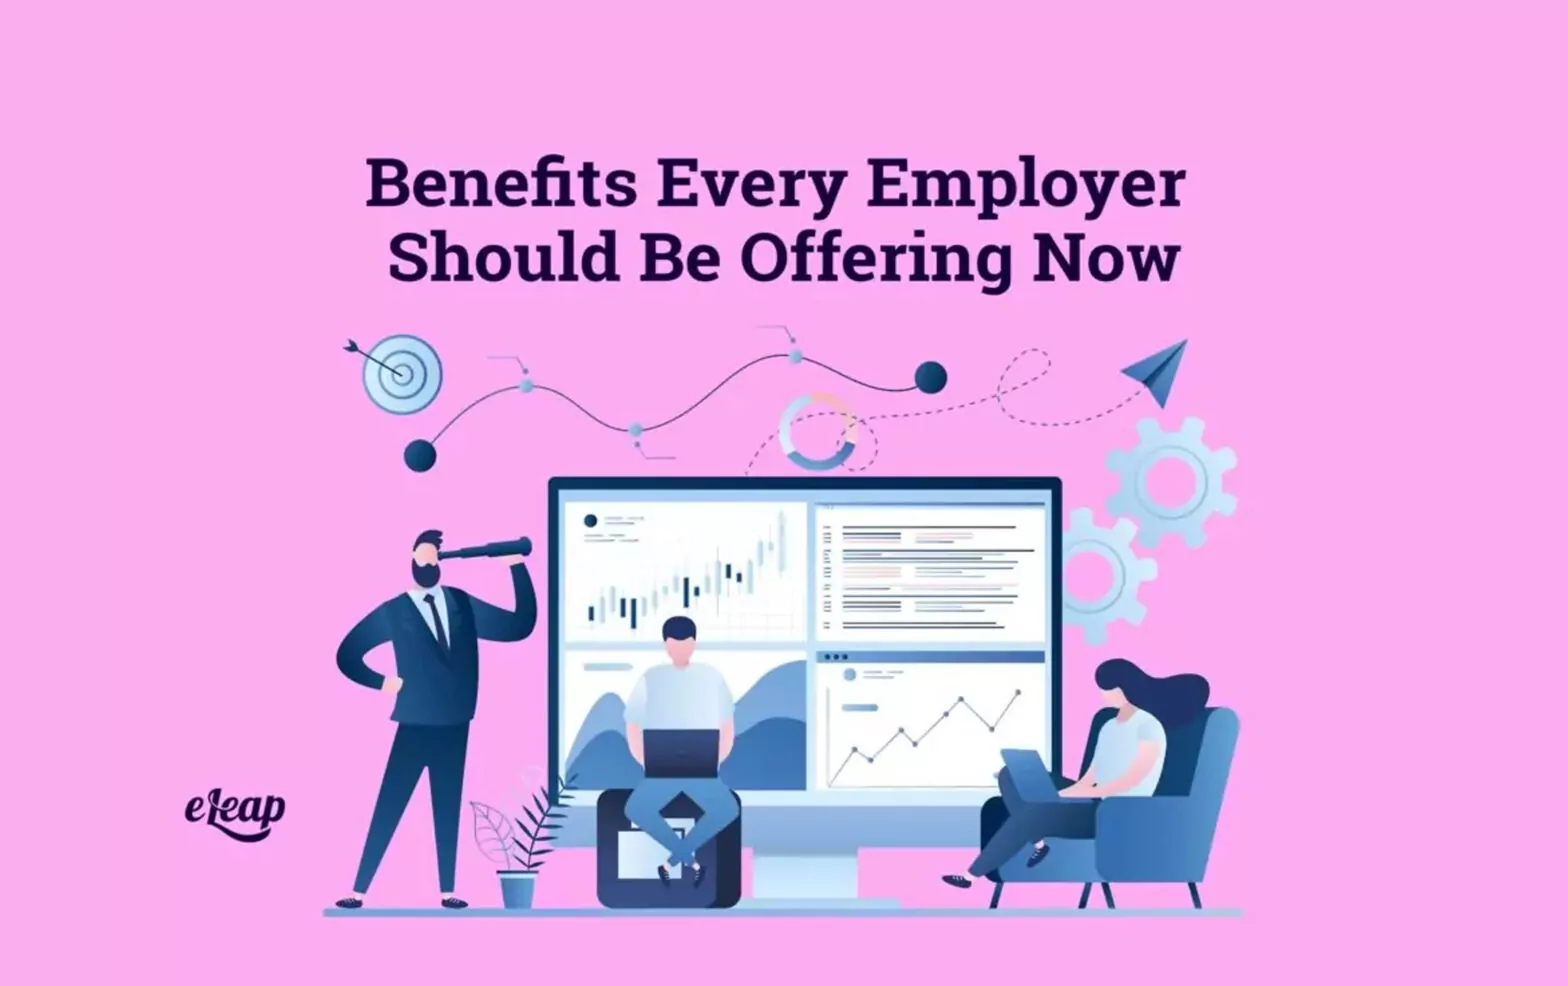 Benefits Every Employer Should Be Offering Now